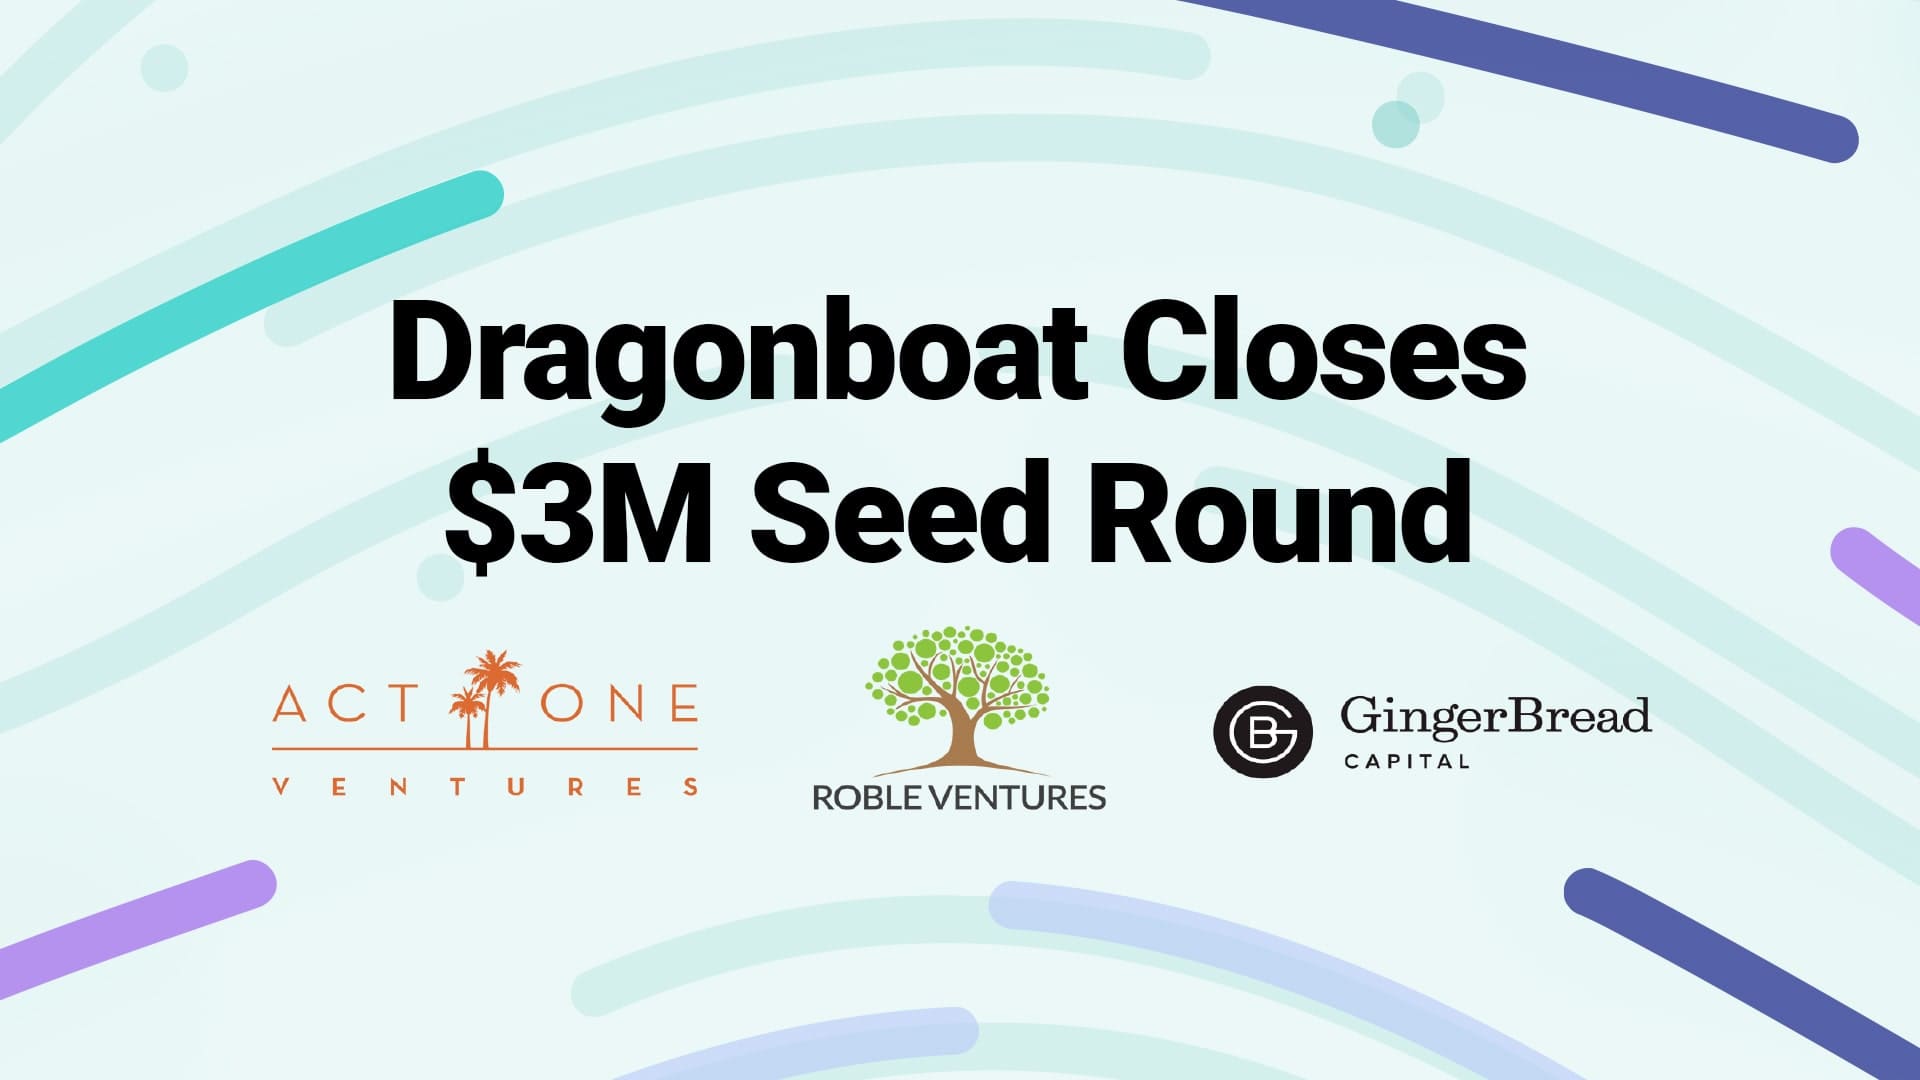 Dragonboat Closes $3M Seed Round To Bring Product Portfolio Management To Outcome Focused Teams